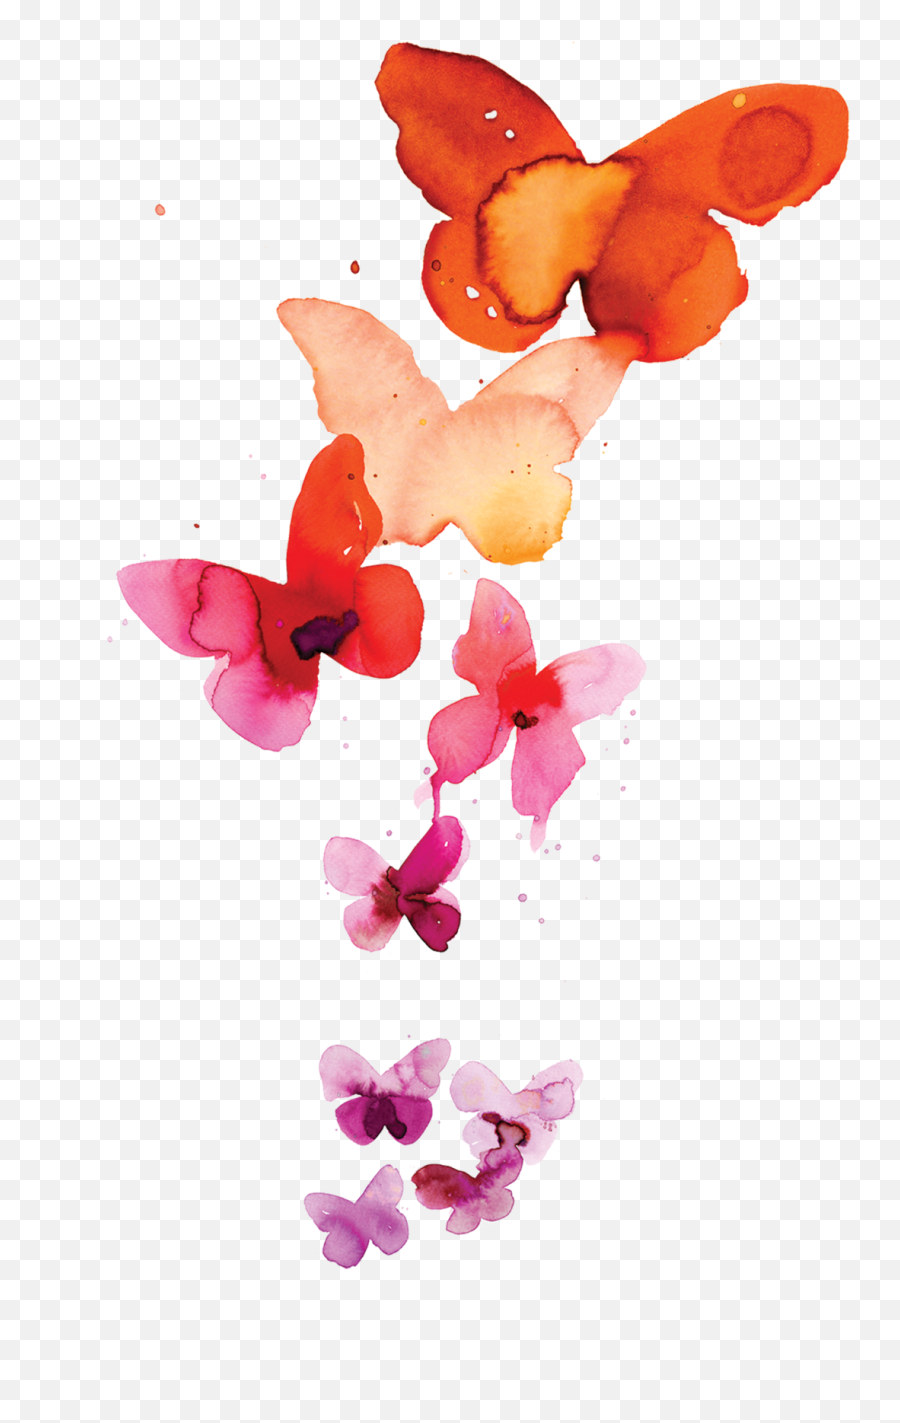 Download Coral Butterflies - Watercolor Images Free Butterfly Png,Butterfly Tattoo Png